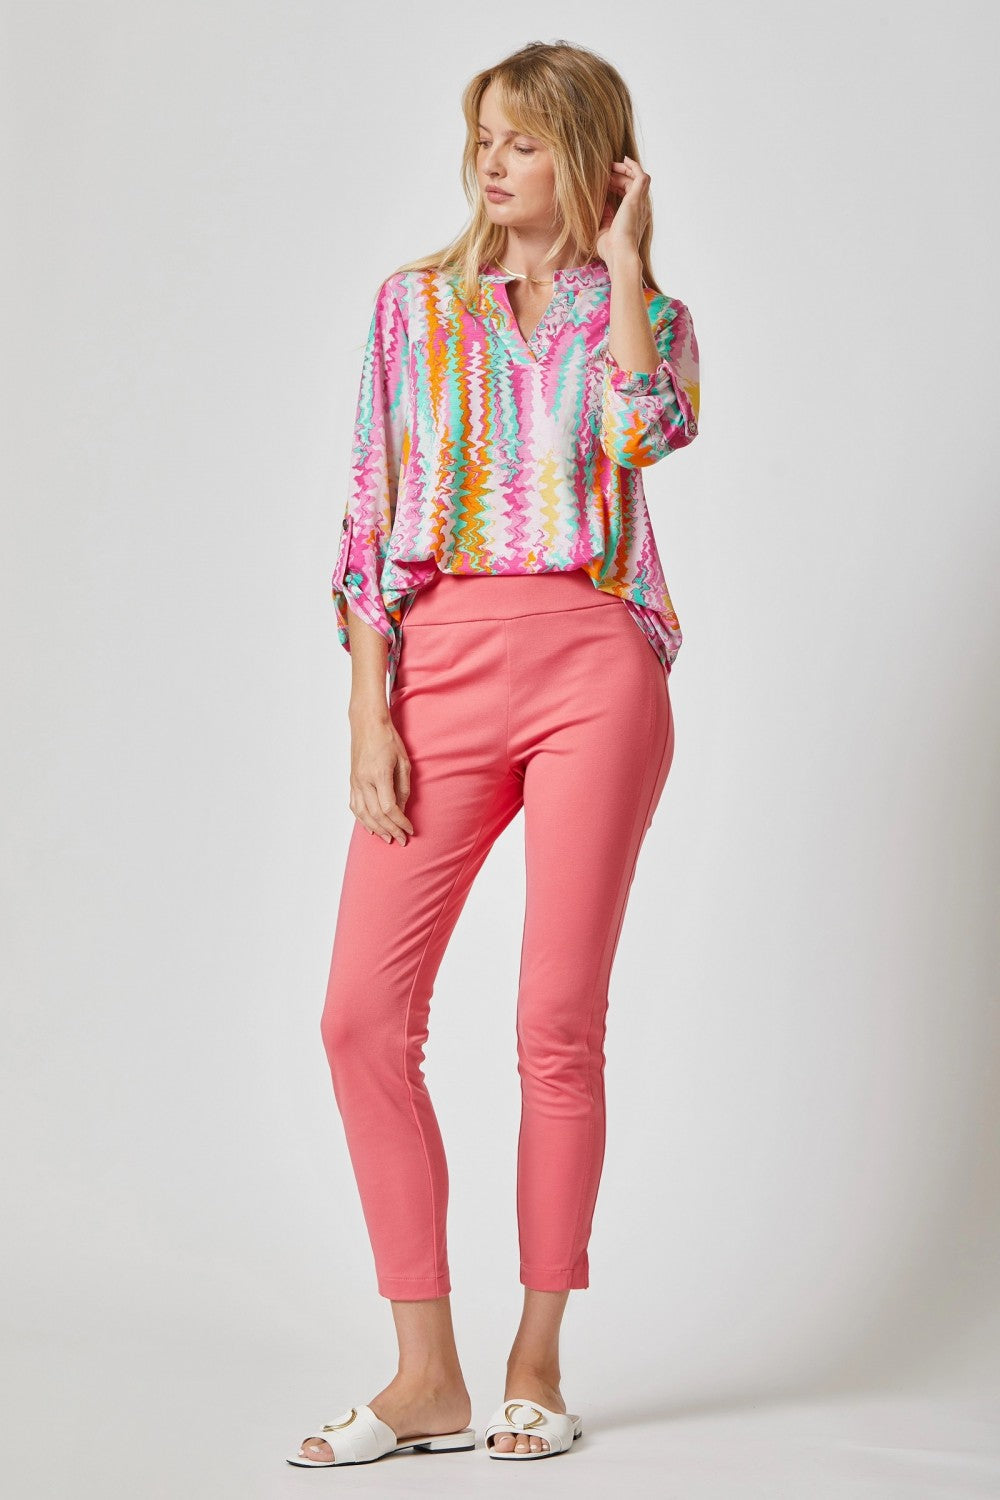 Shades of Spring Vertical Print Lizzy Top